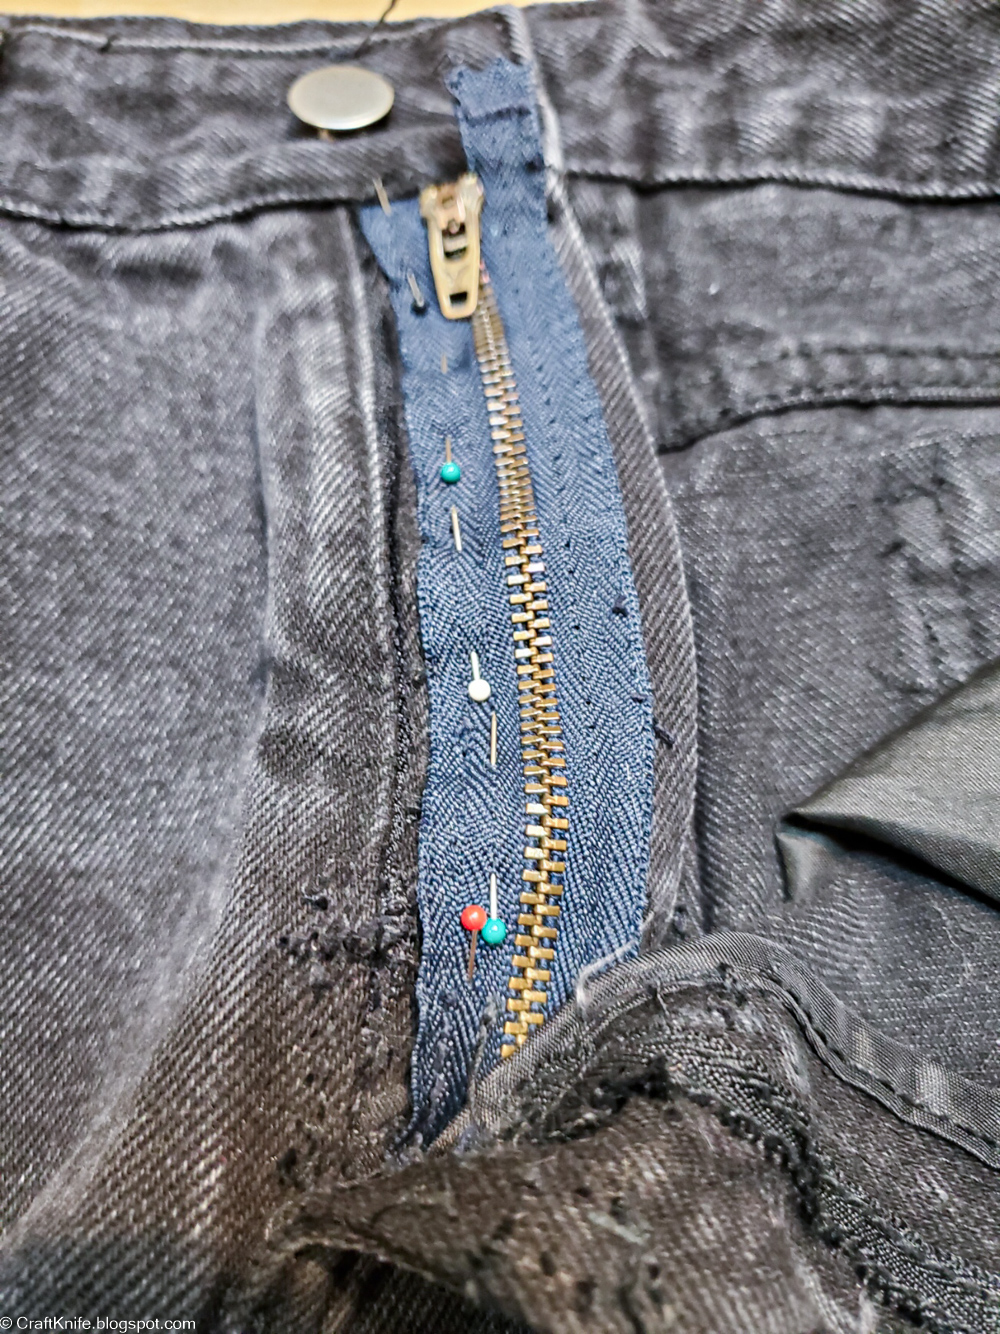 How to Replace the Zipper in a Pair of Pants